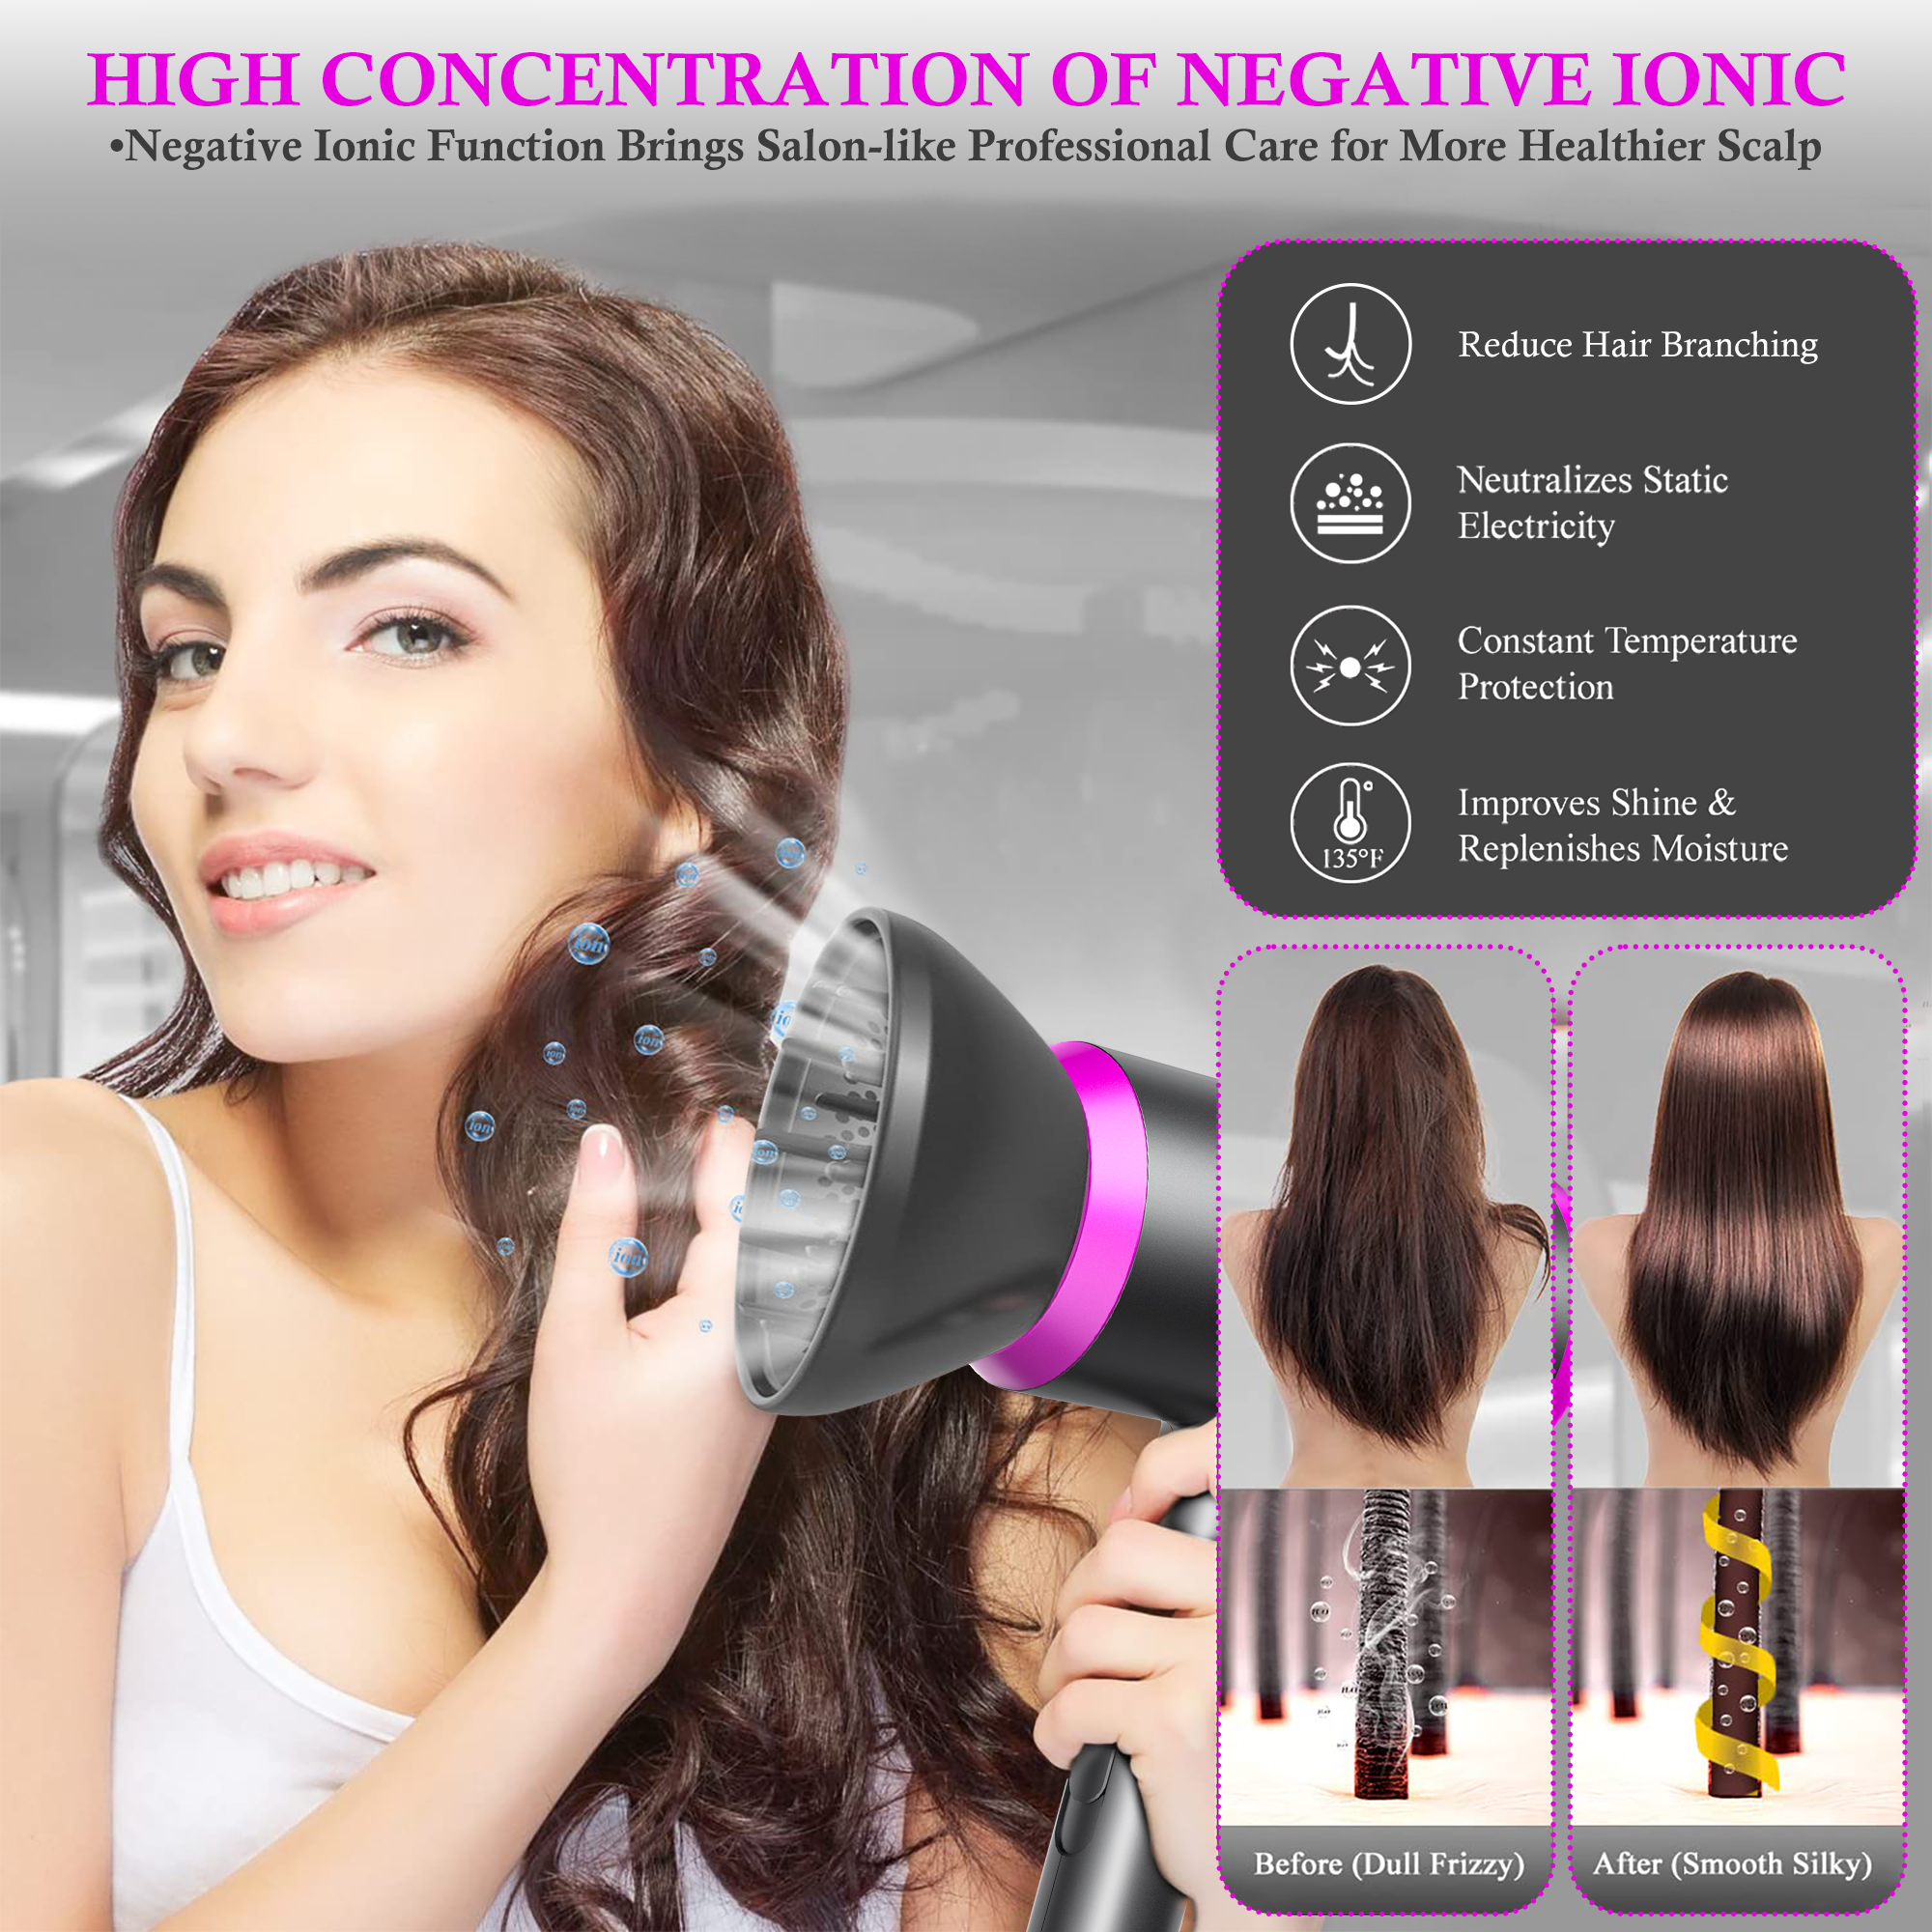 Hair Dryer with Diffuser and Concentrator, Professional Ionic Hair Dryer Fast Drying with 3 Heat Settings for Women - image 3 of 11